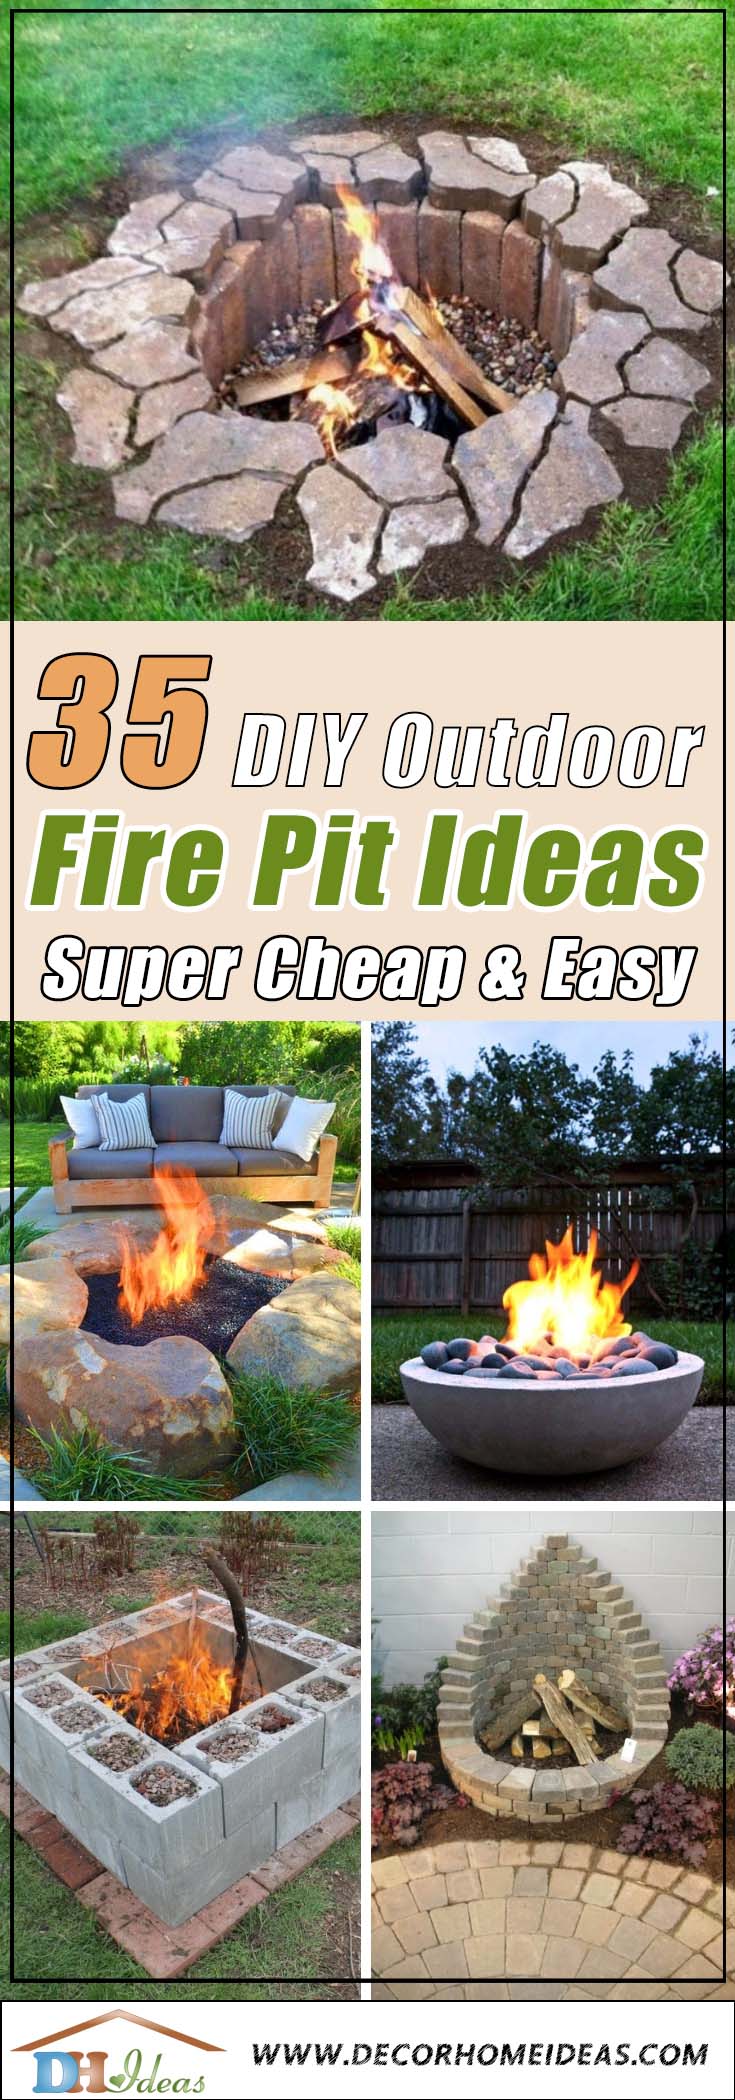 35 Easy To Do Fire Pit Ideas And, How To Make Outdoor Fire Pit